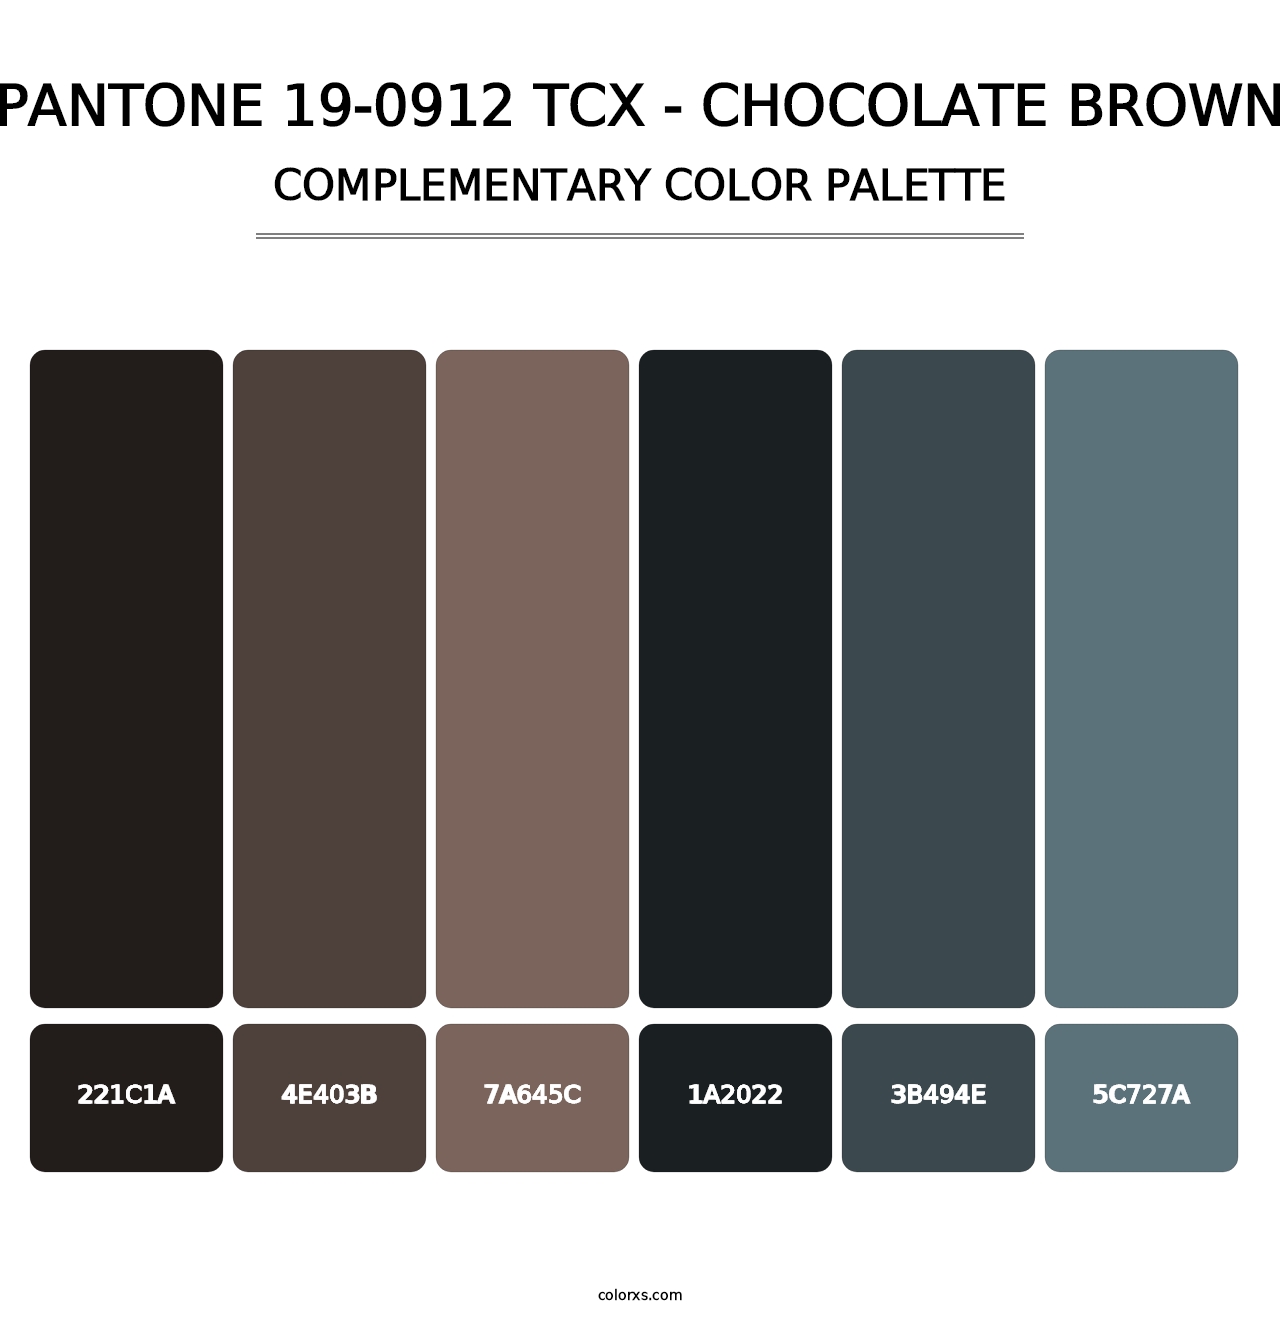 PANTONE 19-0912 TCX - Chocolate Brown - Complementary Color Palette